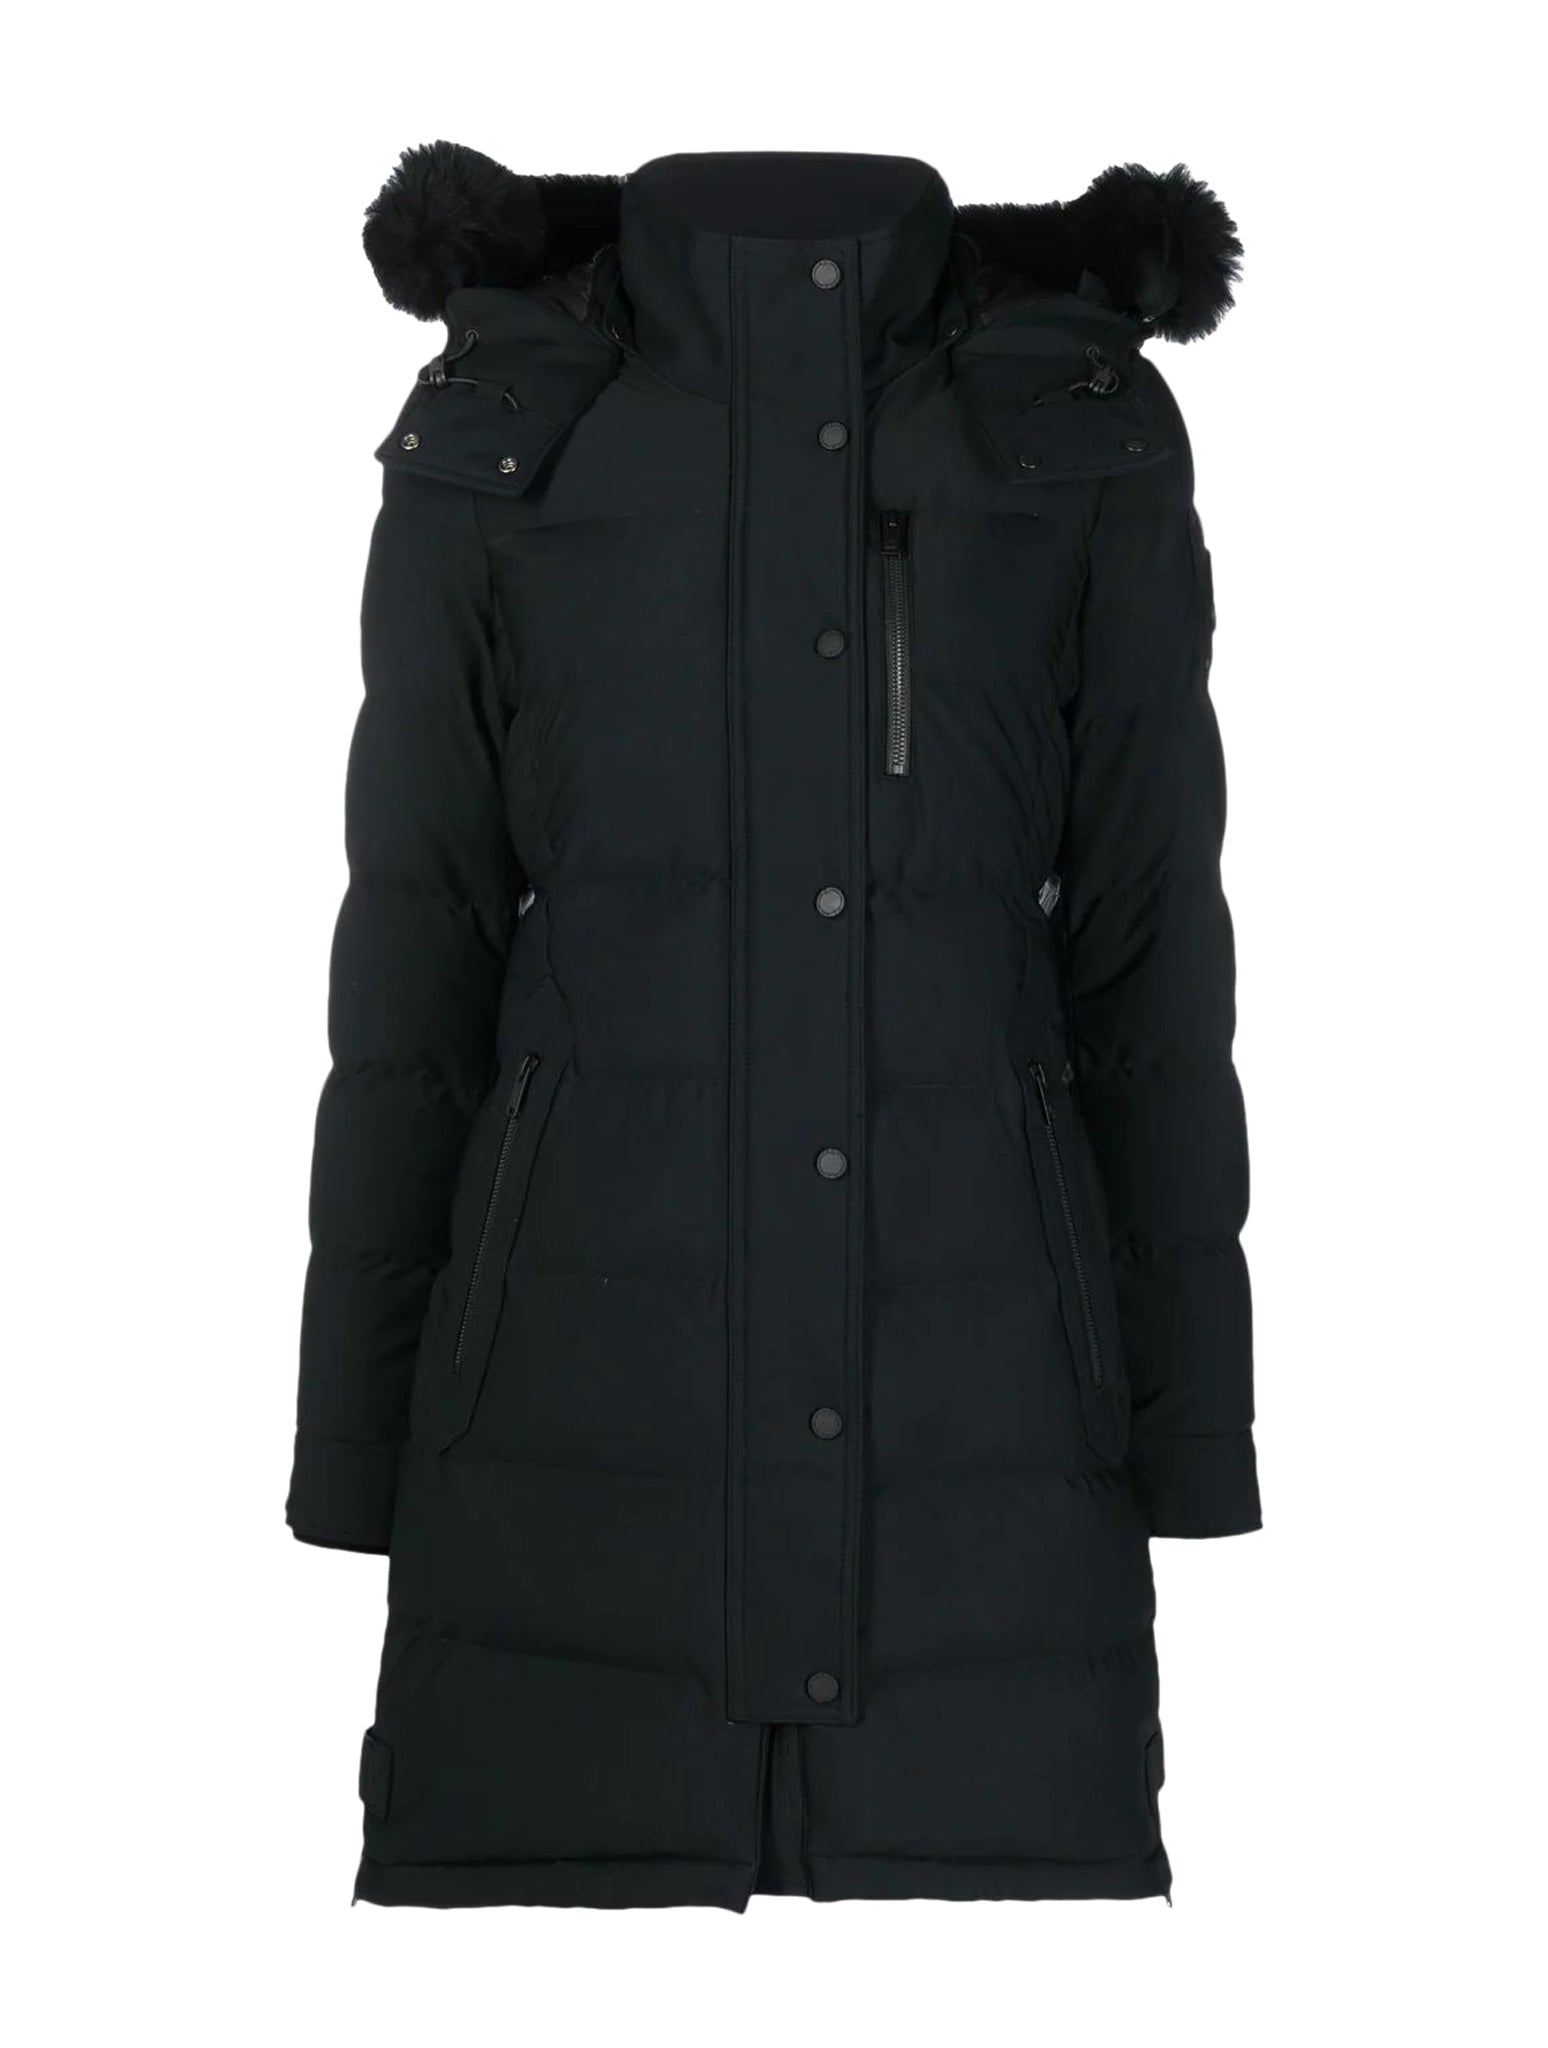 WATERSHED PARKA 2